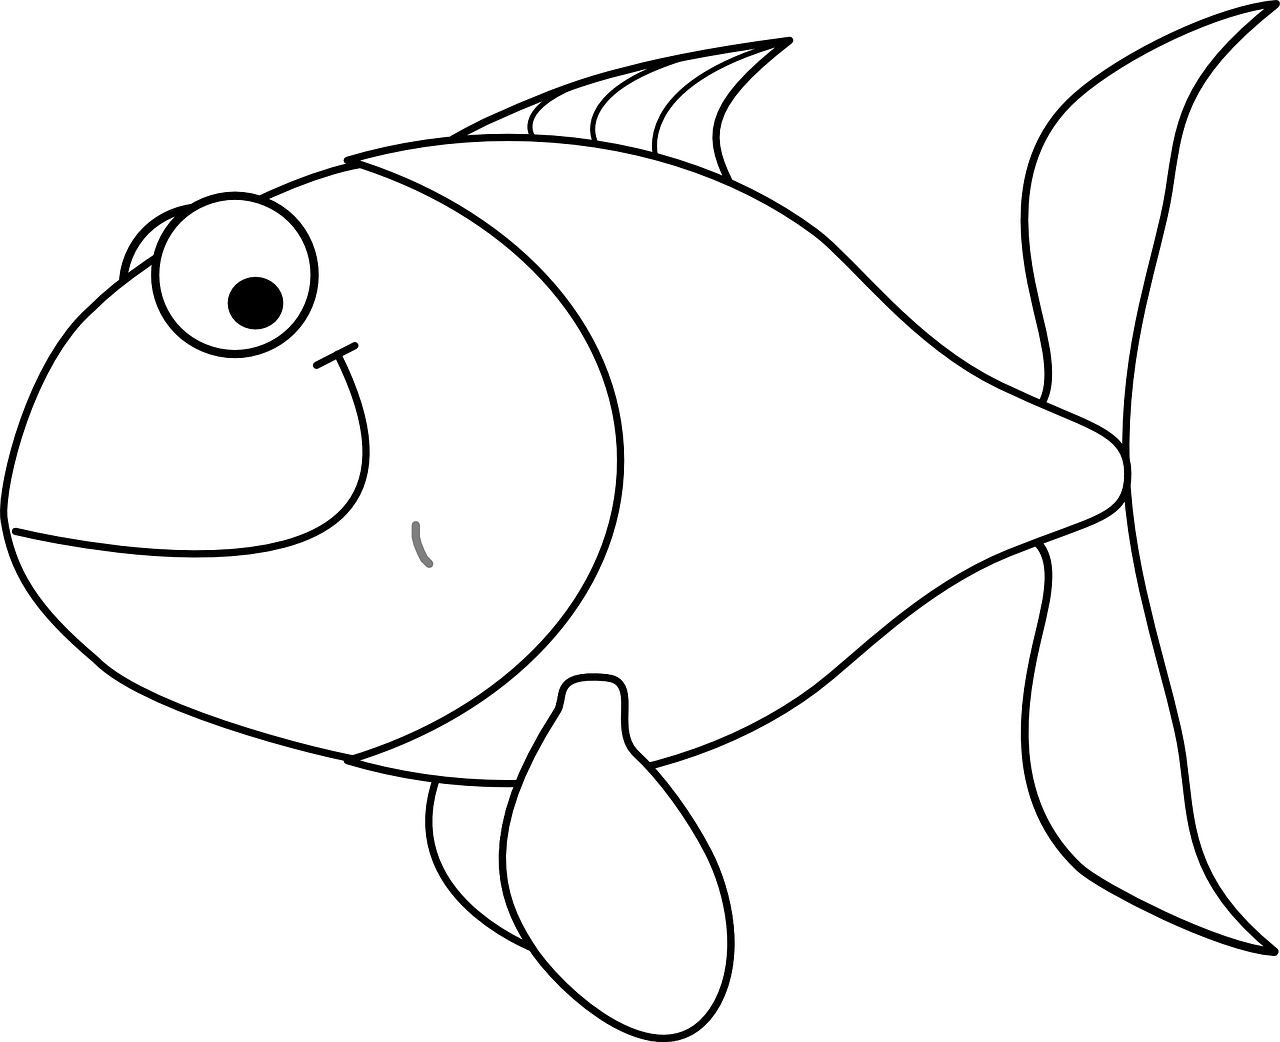 Fish coloring pages for kids 14 pics HOWTODRAW in 1